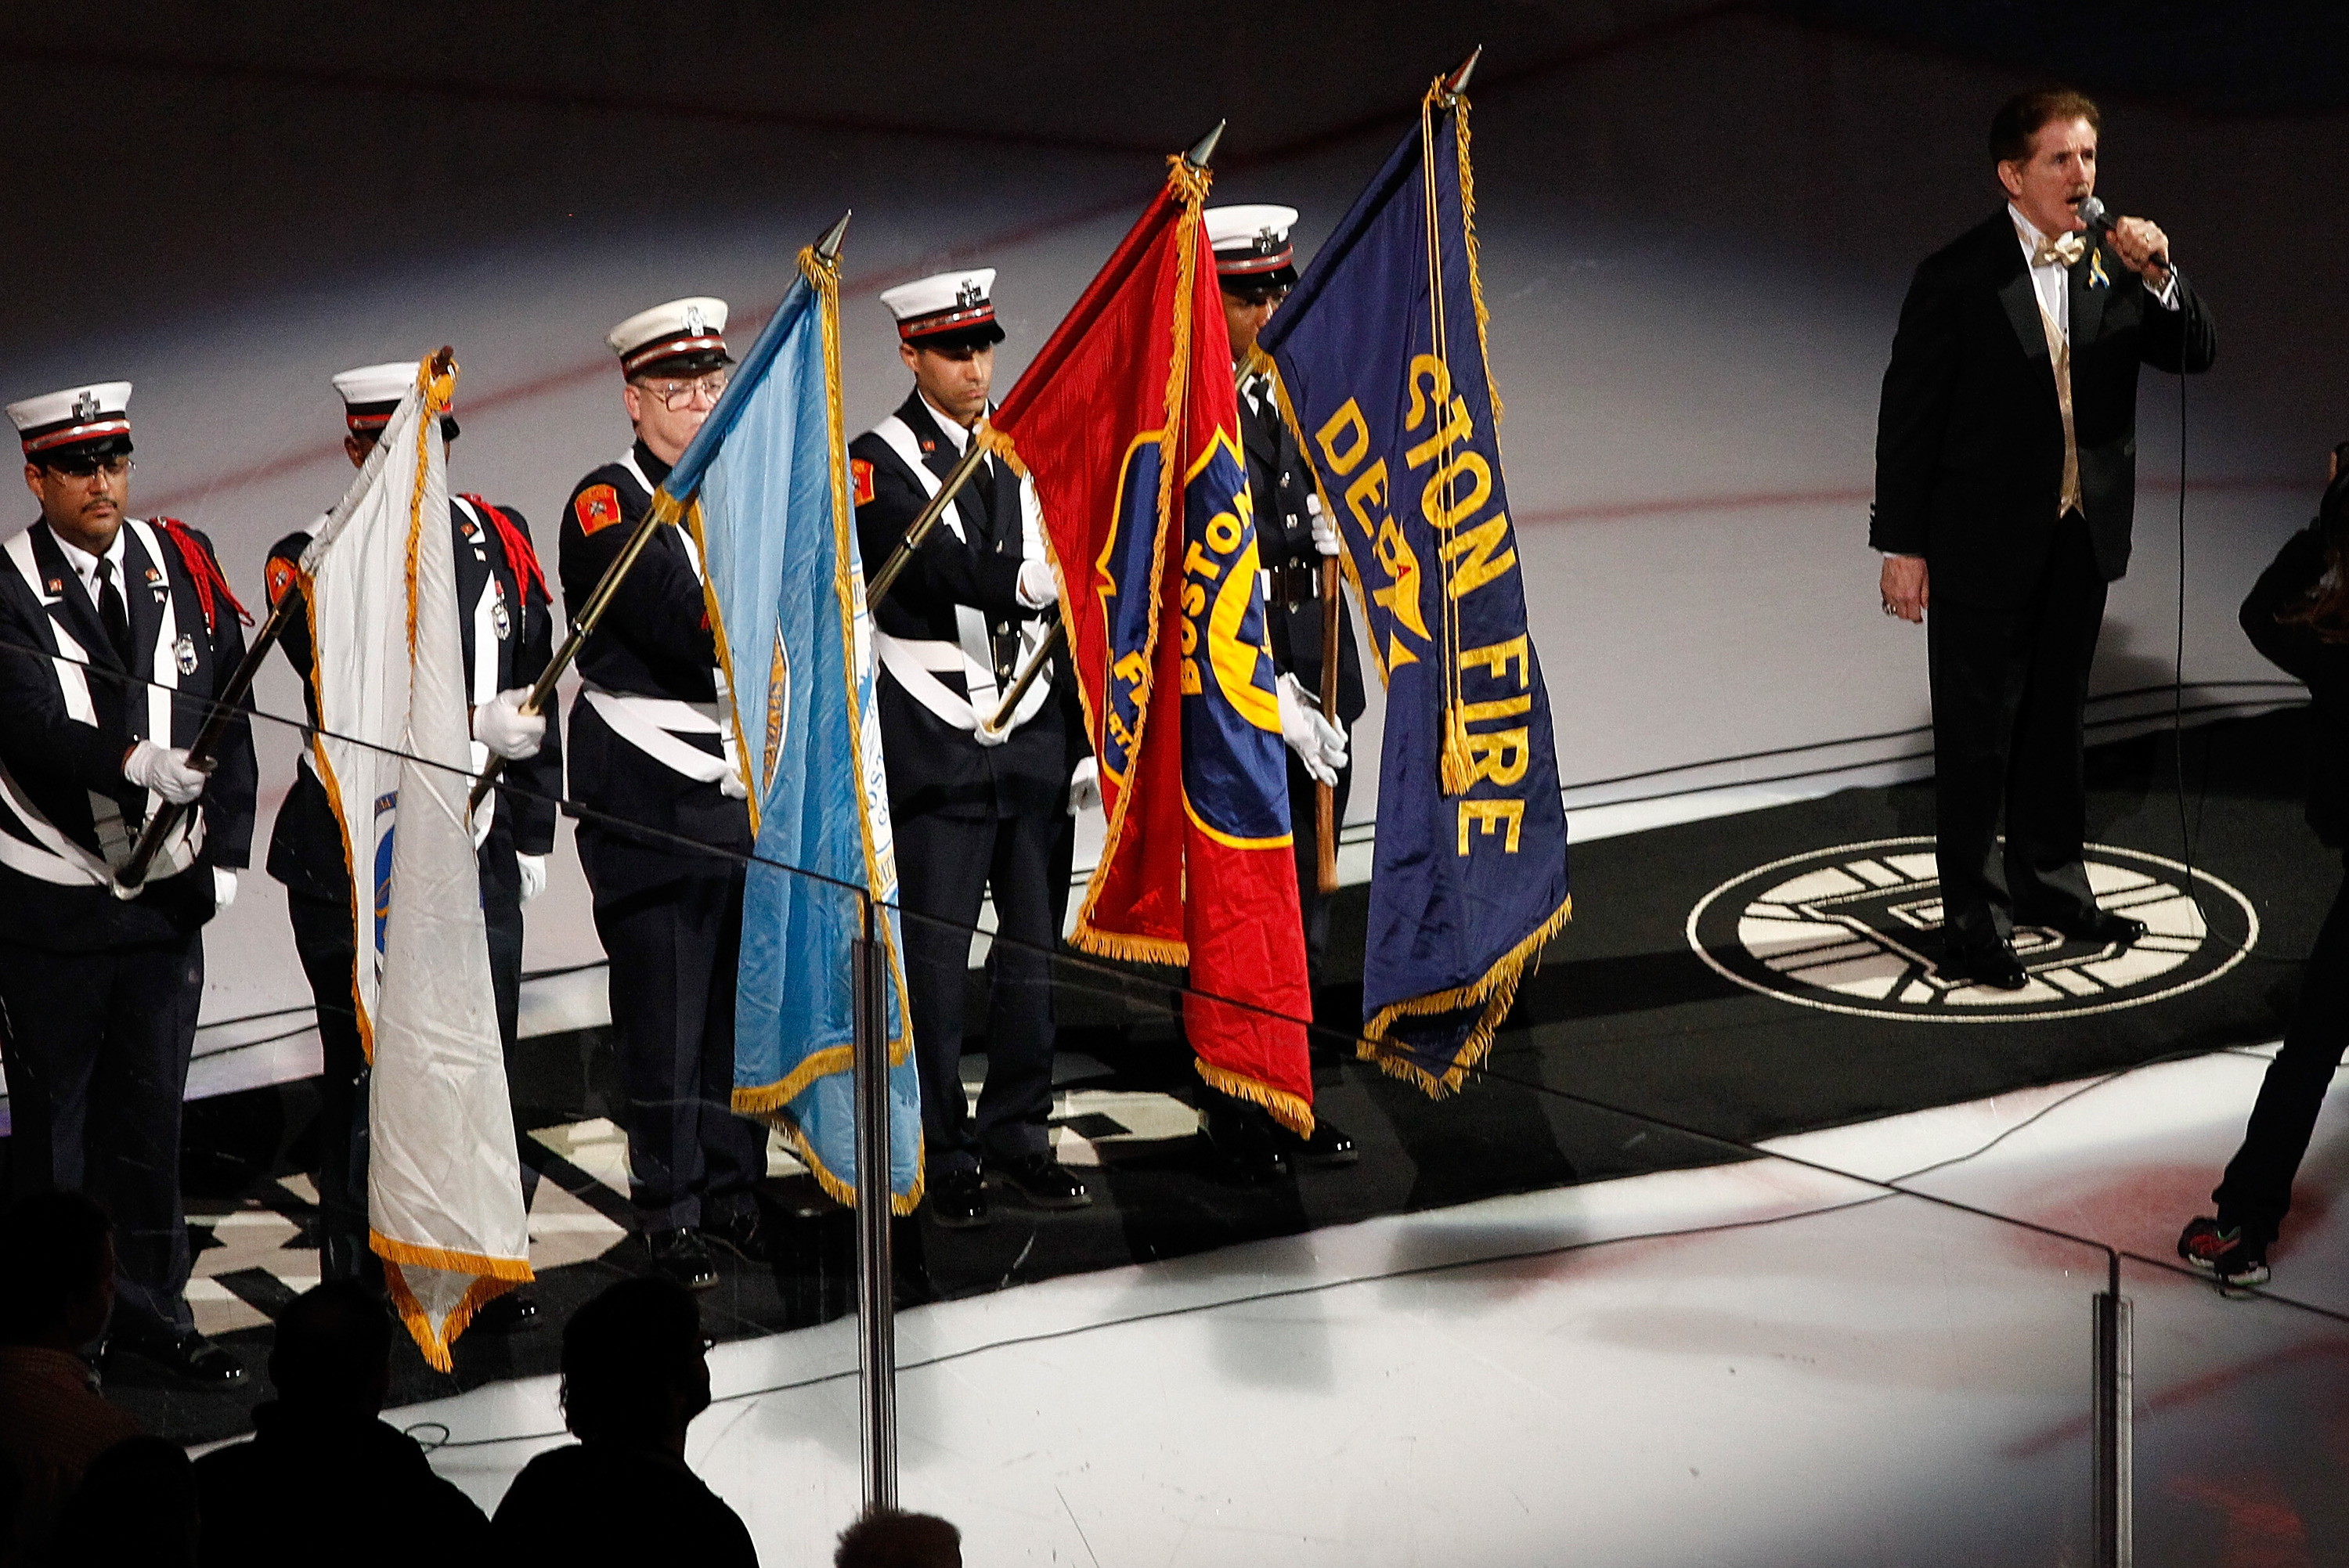 NHL fan singing national anthem, honouring soldier with standing